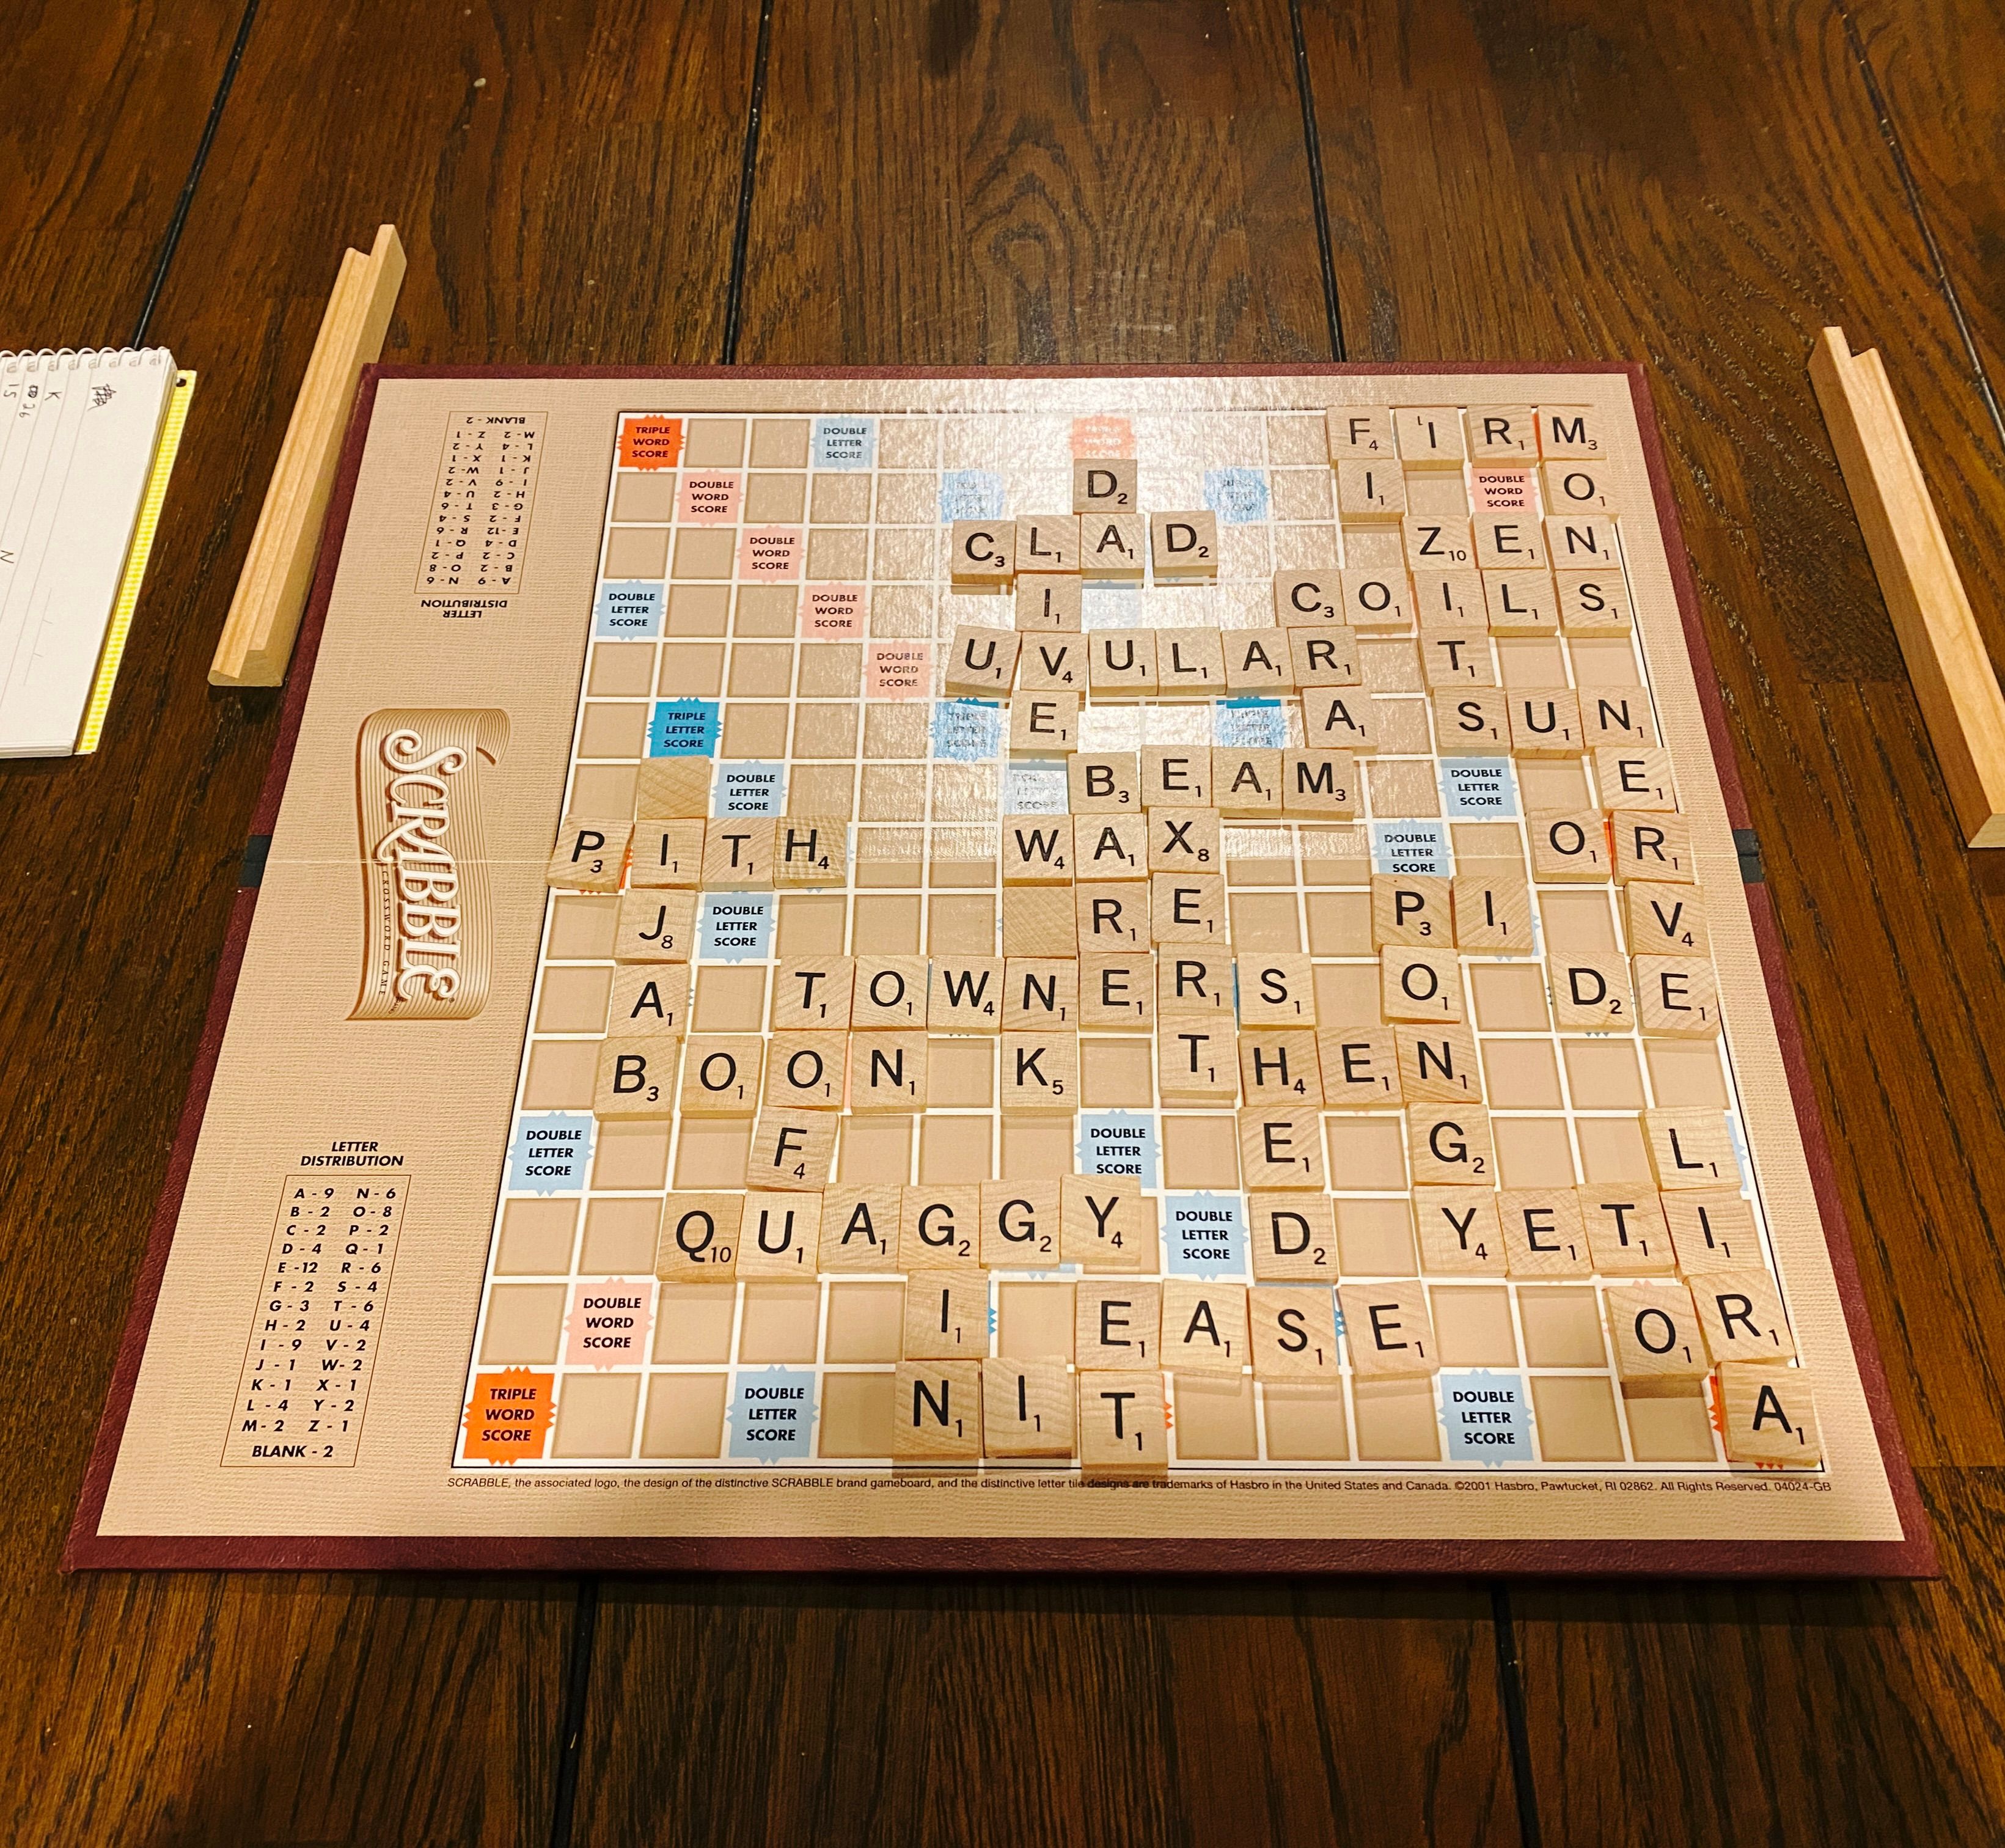 A photo of the end game state of a Scrabble board.